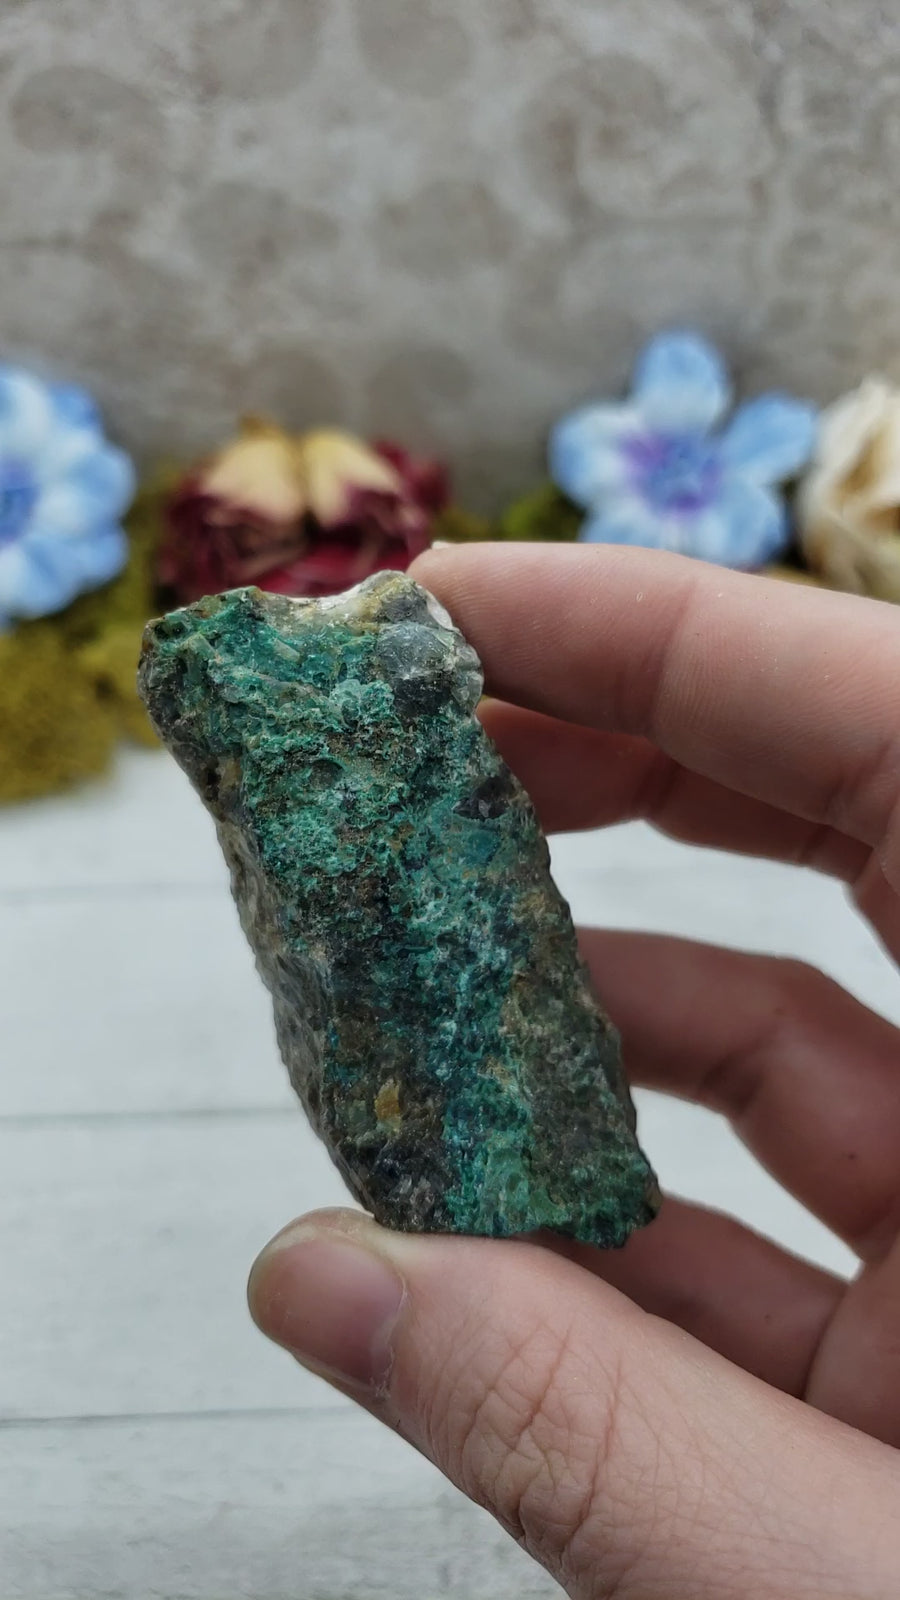 video of rough chrysoprase stone in hand, showing off various sides